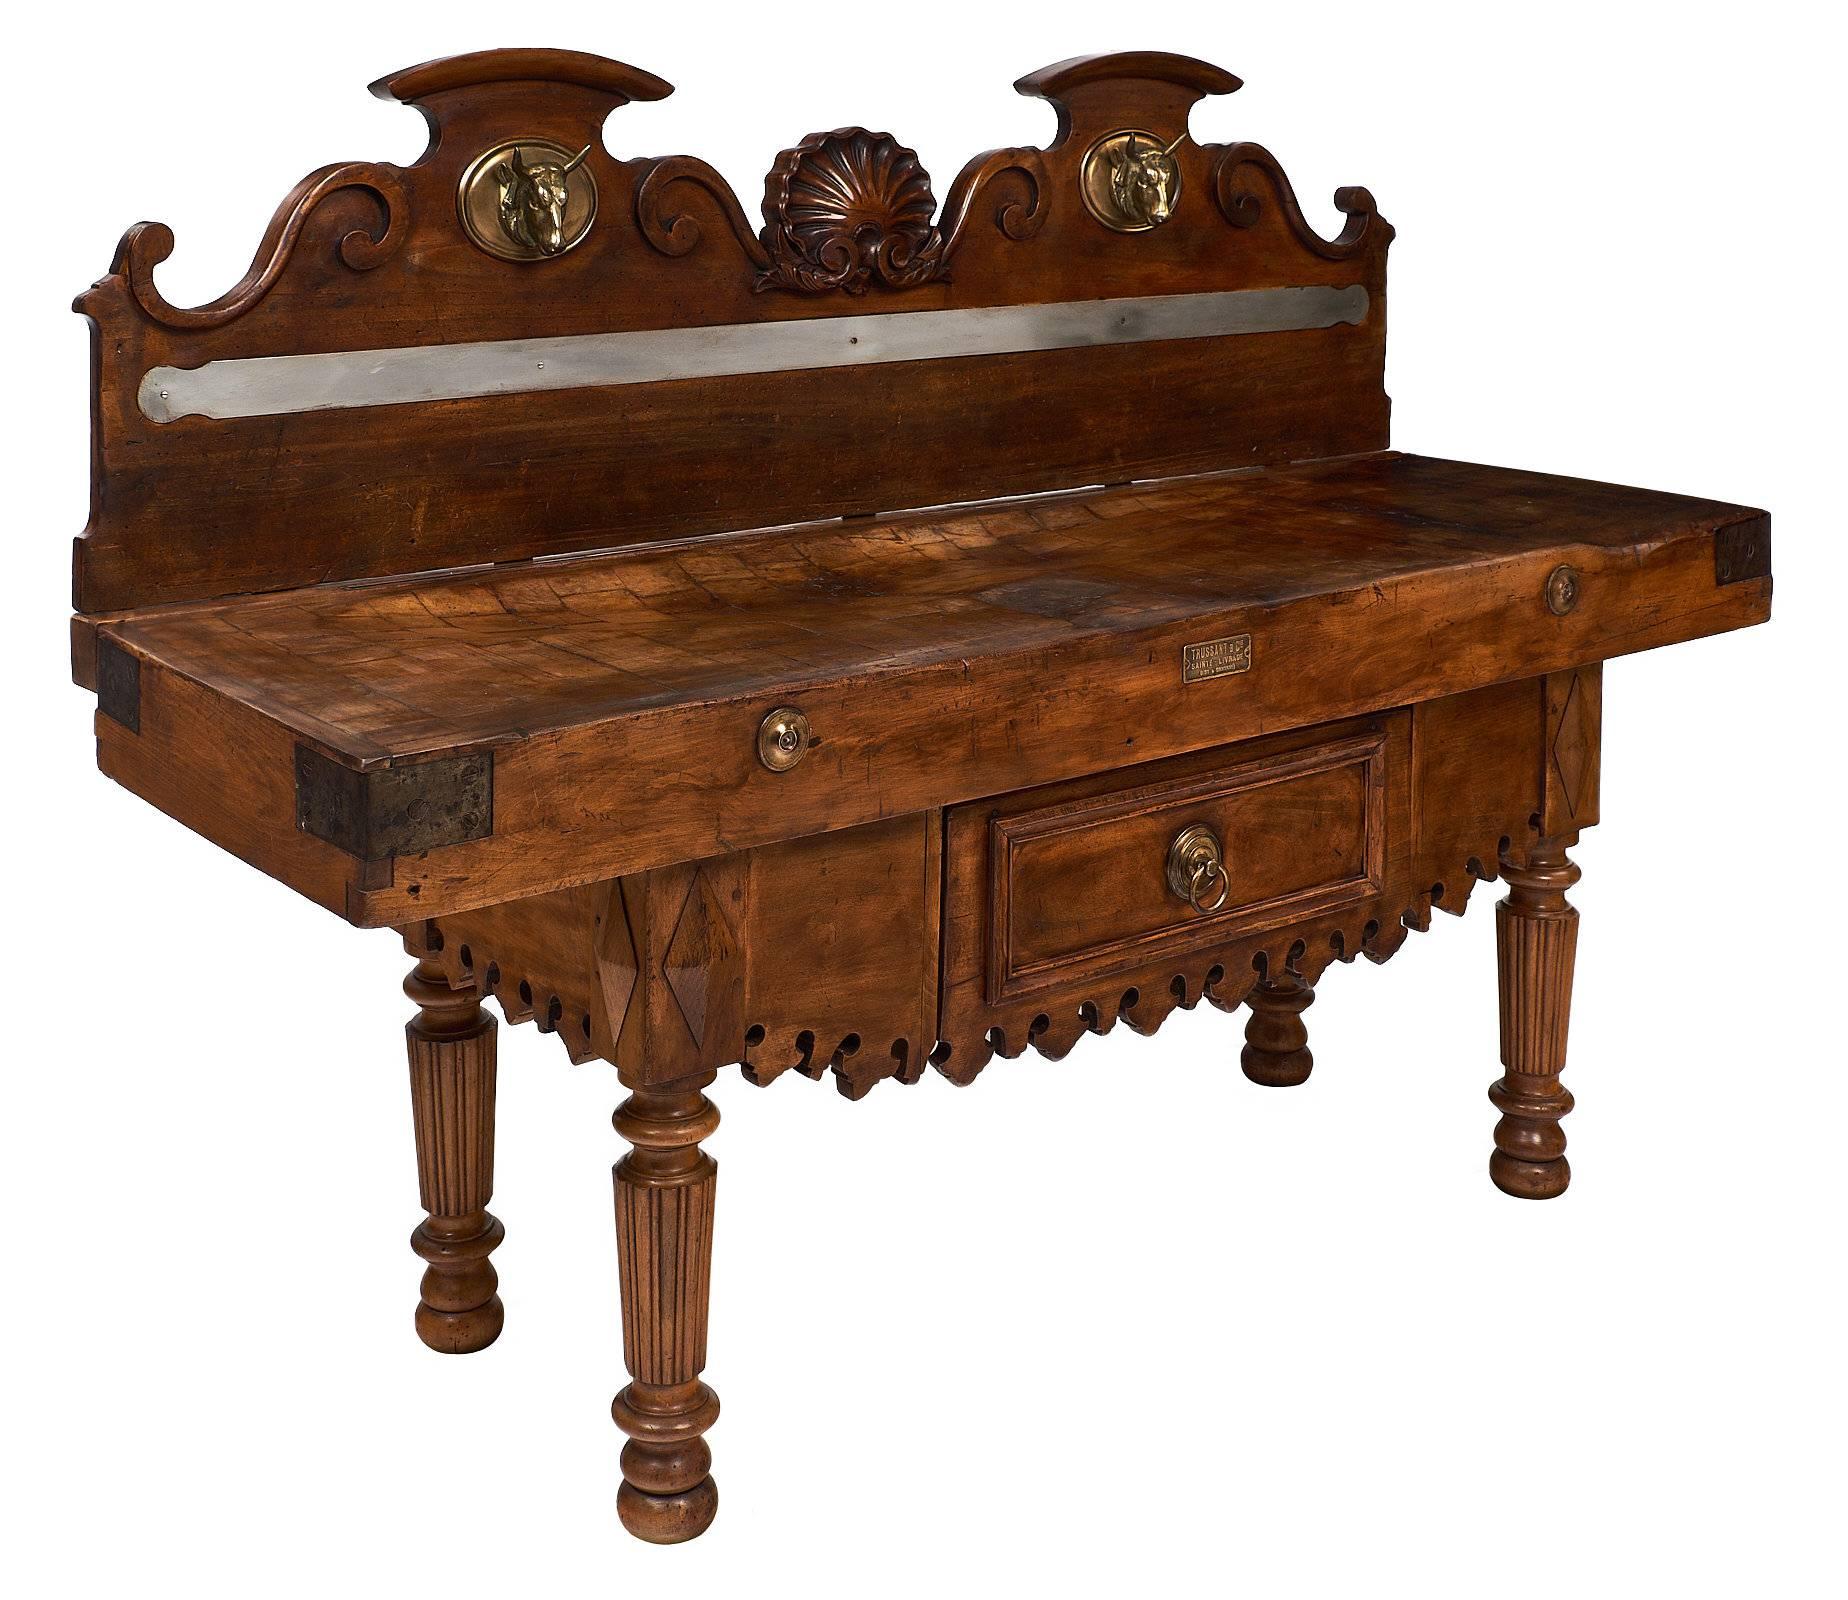 From Vienne in The Rhone Valley, this spectacular French antique butcher table has the original decor boasting bronze finely cast cow heads flanking a hand carved scallop. The knife holder is in place and the working slab is trimmed with steel on